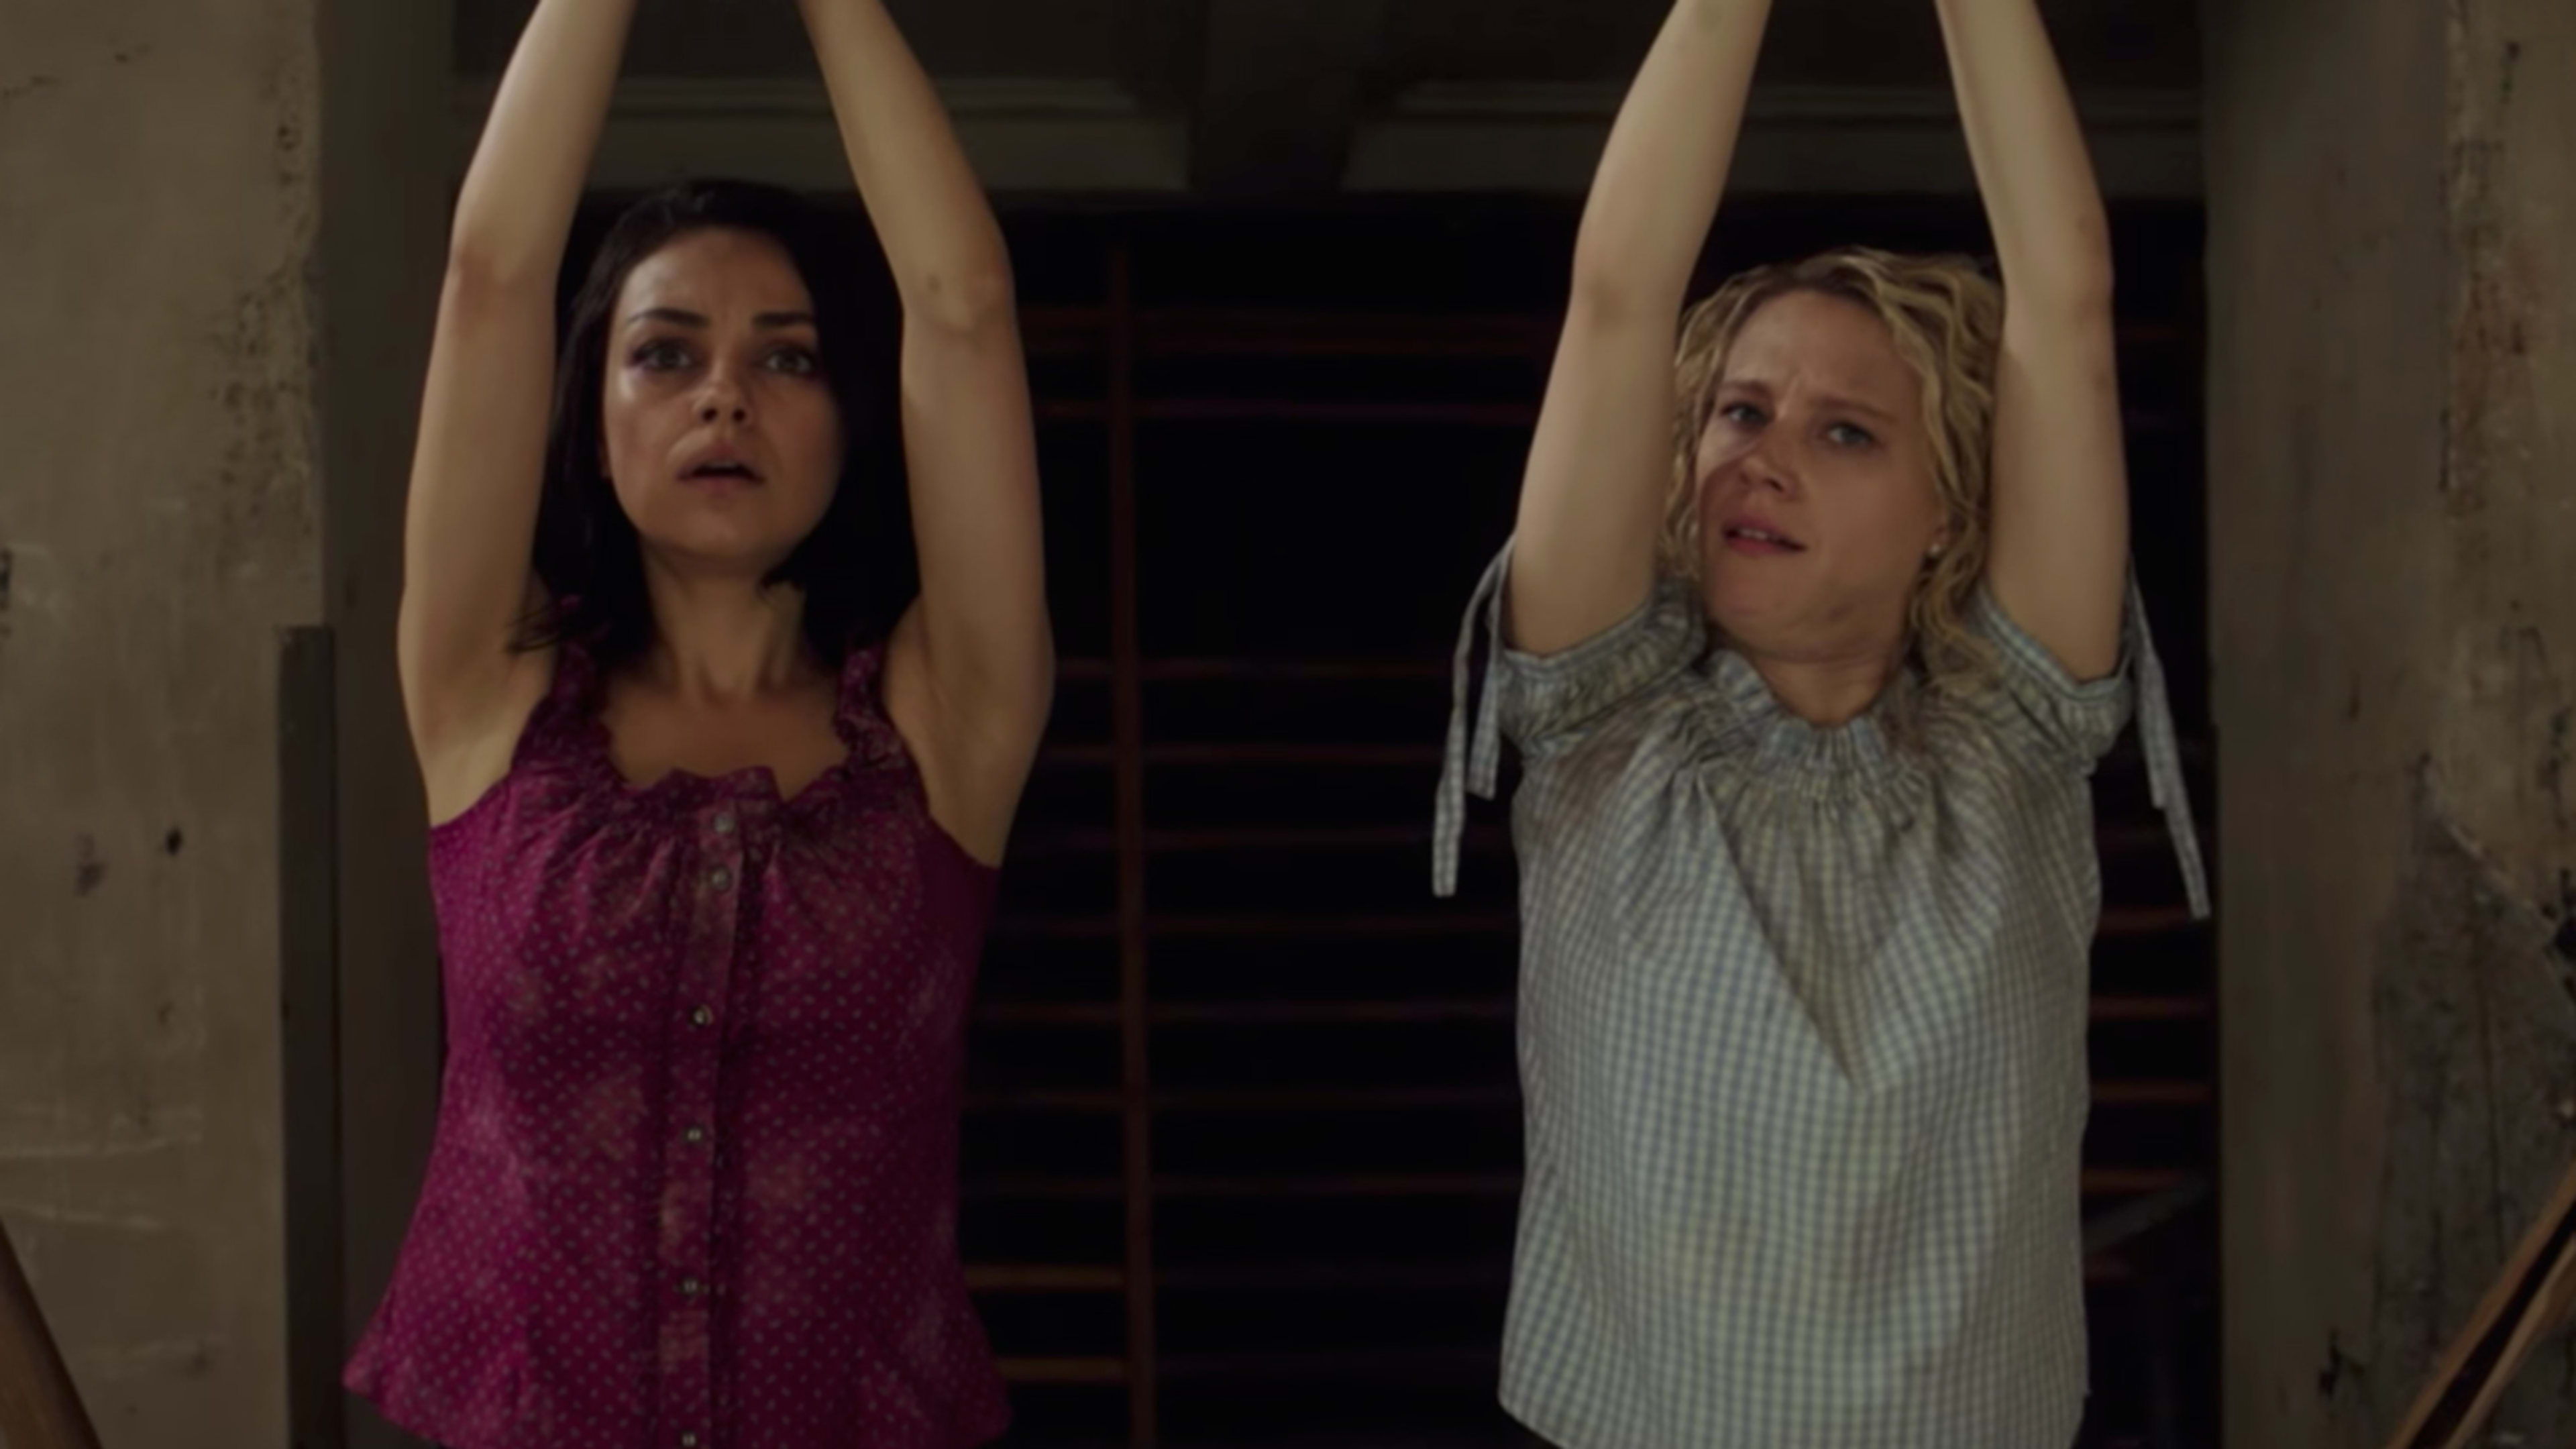 This Buddy Comedy With Mila Kunis & Kate McKinnon Is What The World Needs Now